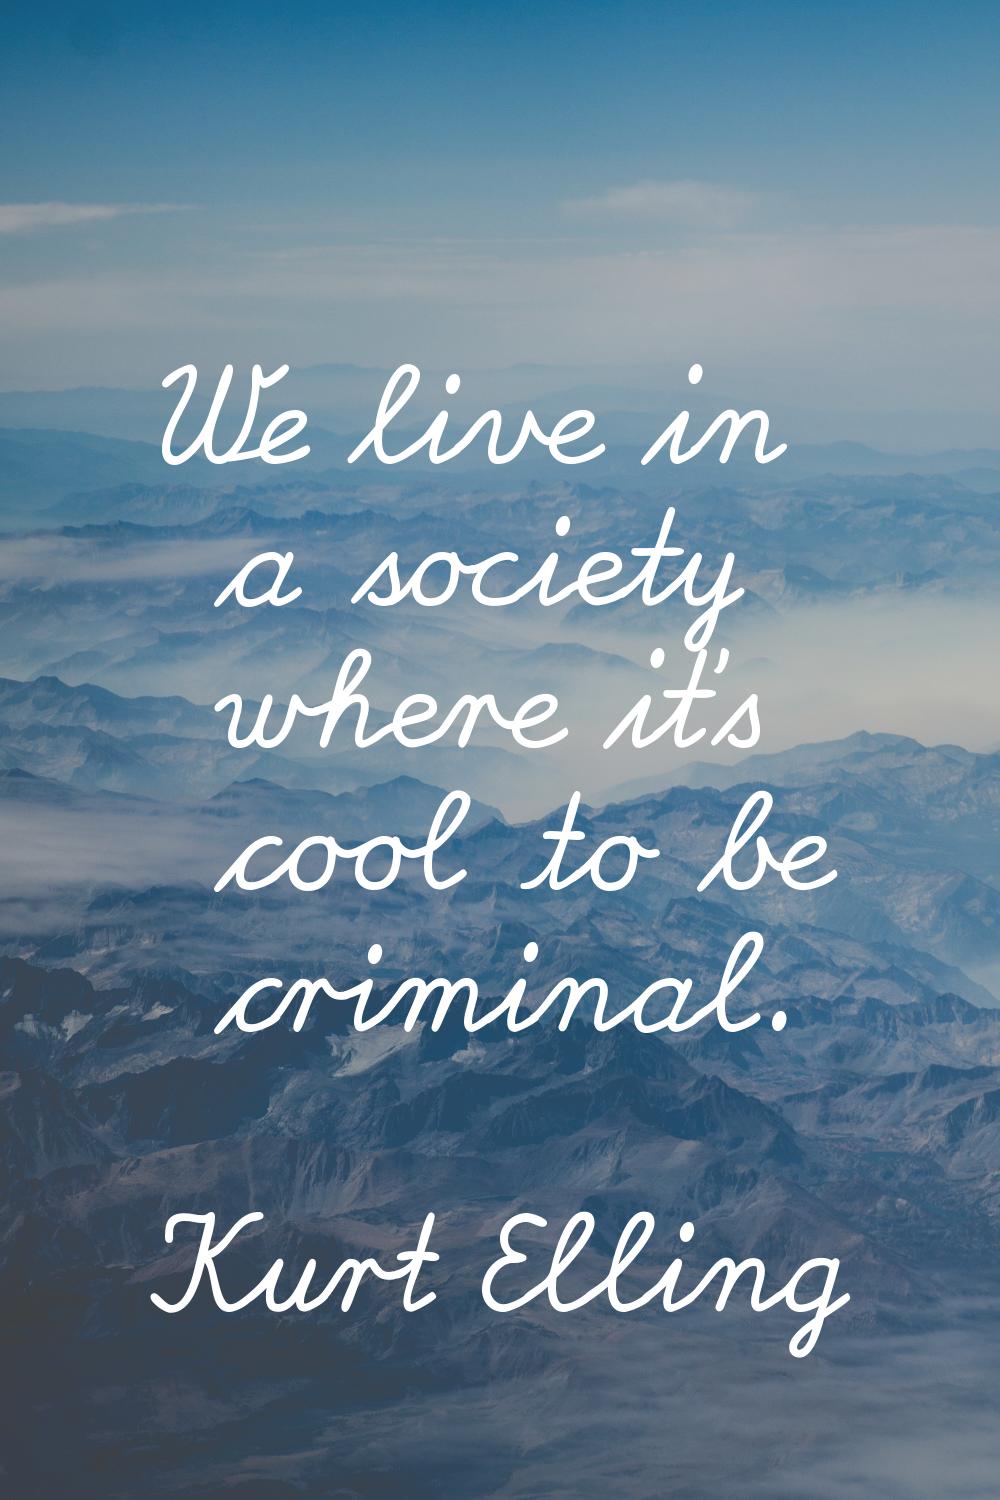 We live in a society where it's cool to be criminal.